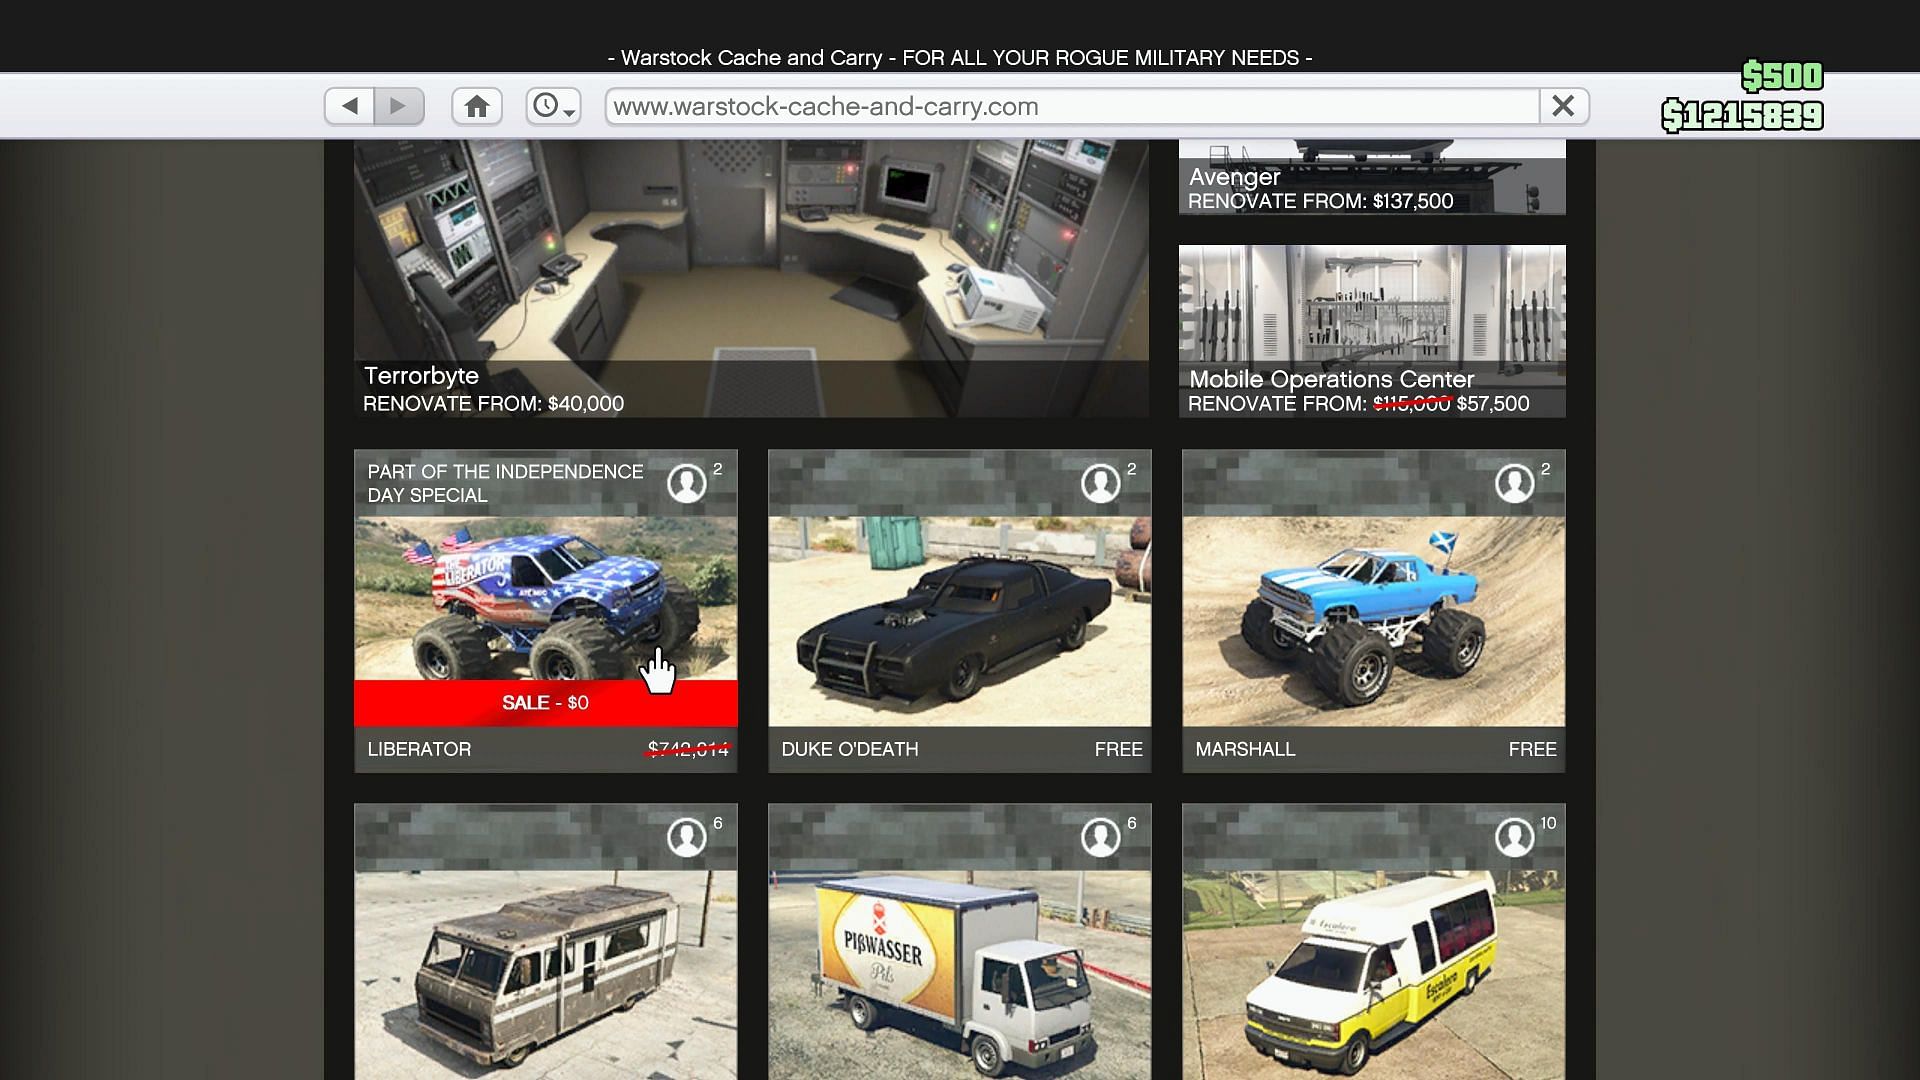 You can buy the free vehicle here (Image via Rockstar Games)